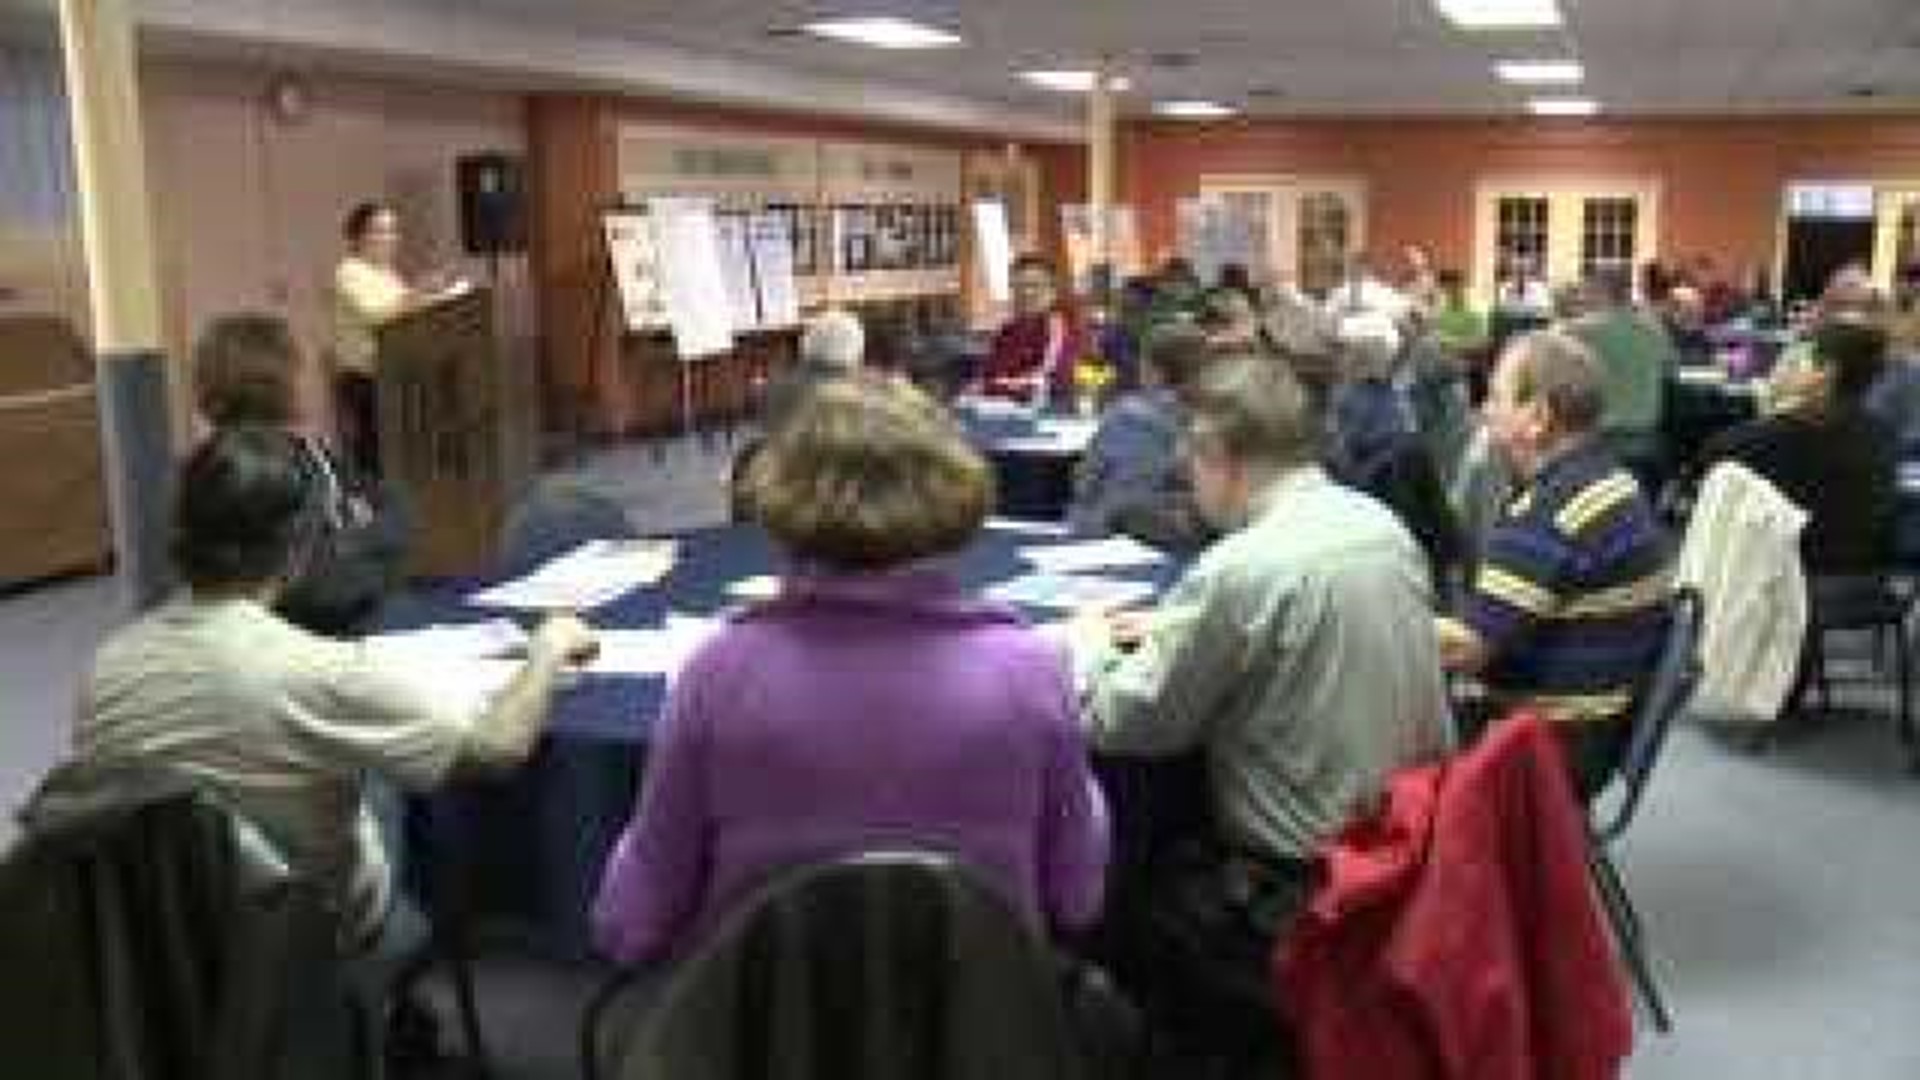 Citizens Voice Their Plan for College Hill